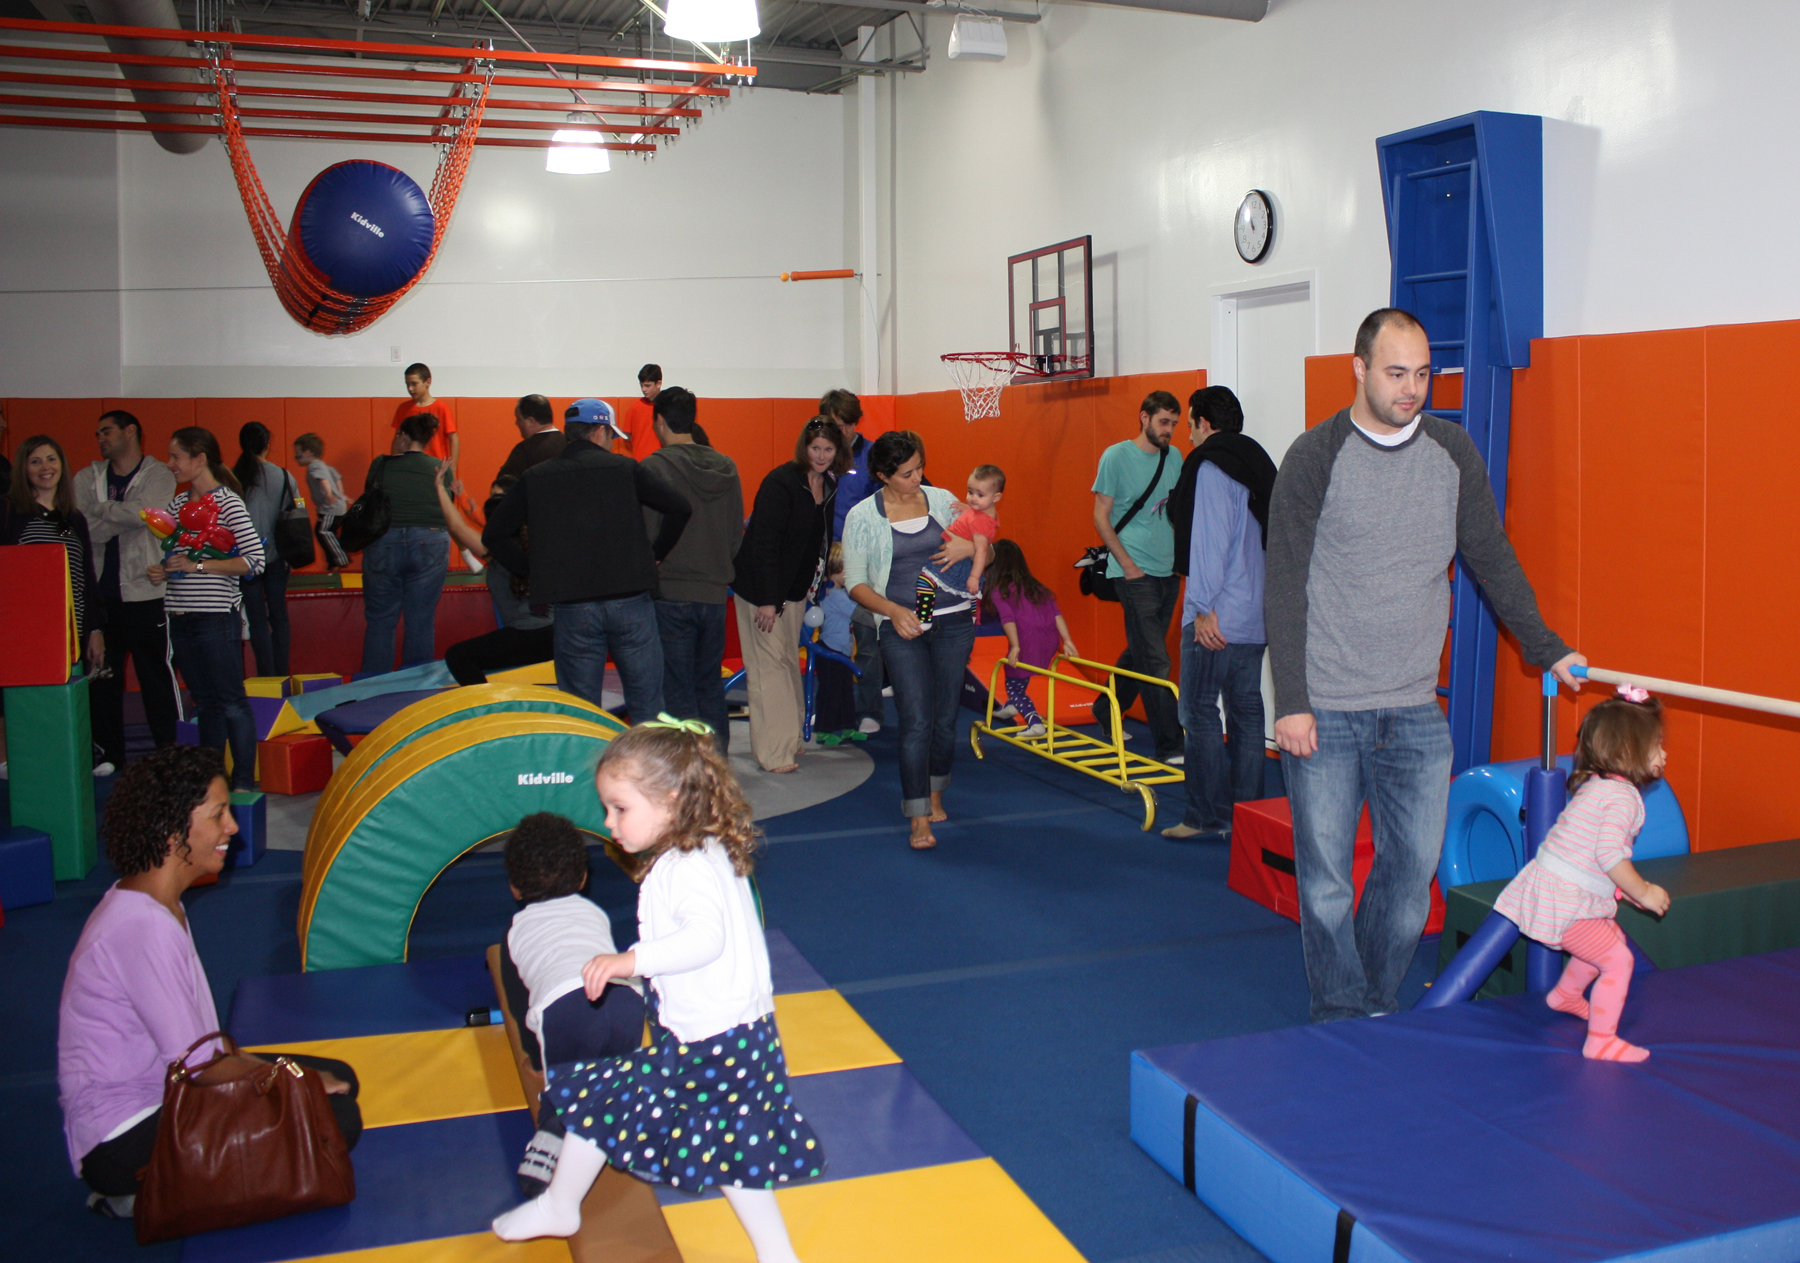 Children of all ages enjoyed free play in the state-of-the-art children’s gym during Kidville Mount Kisco’s Grand Opening celebrations, held Nov. 2 and Nov. 3 at 145 Kisco Avenue.